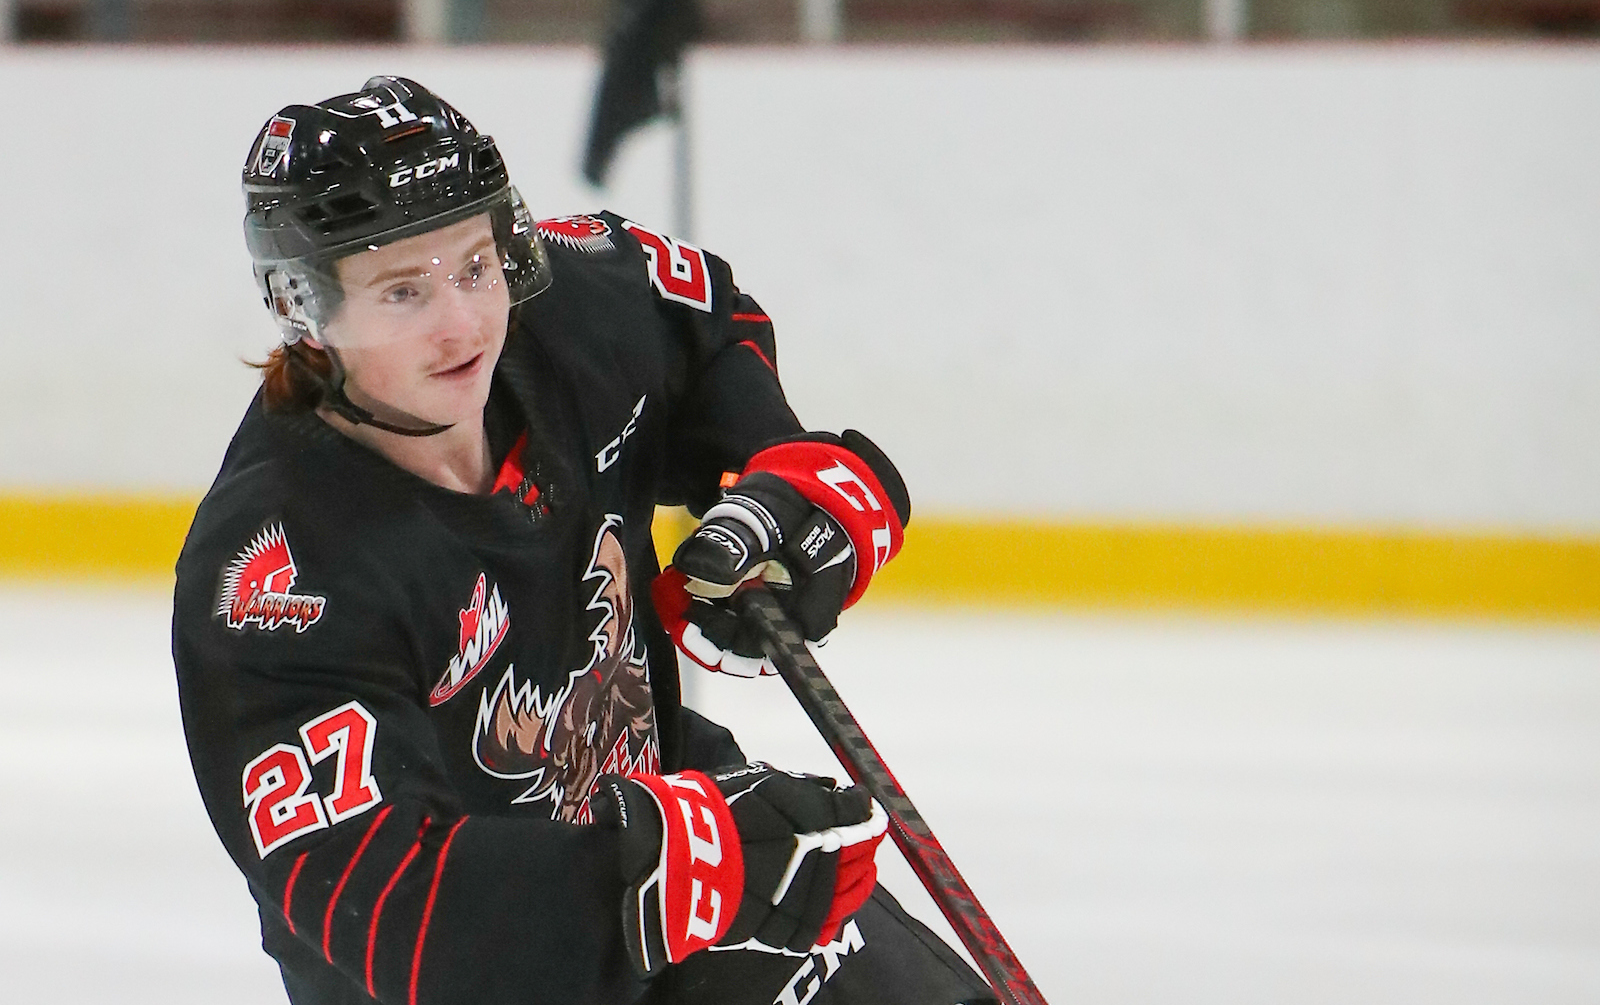 Warriors sign top three picks from 2022 Draft - Moose Jaw Warriors